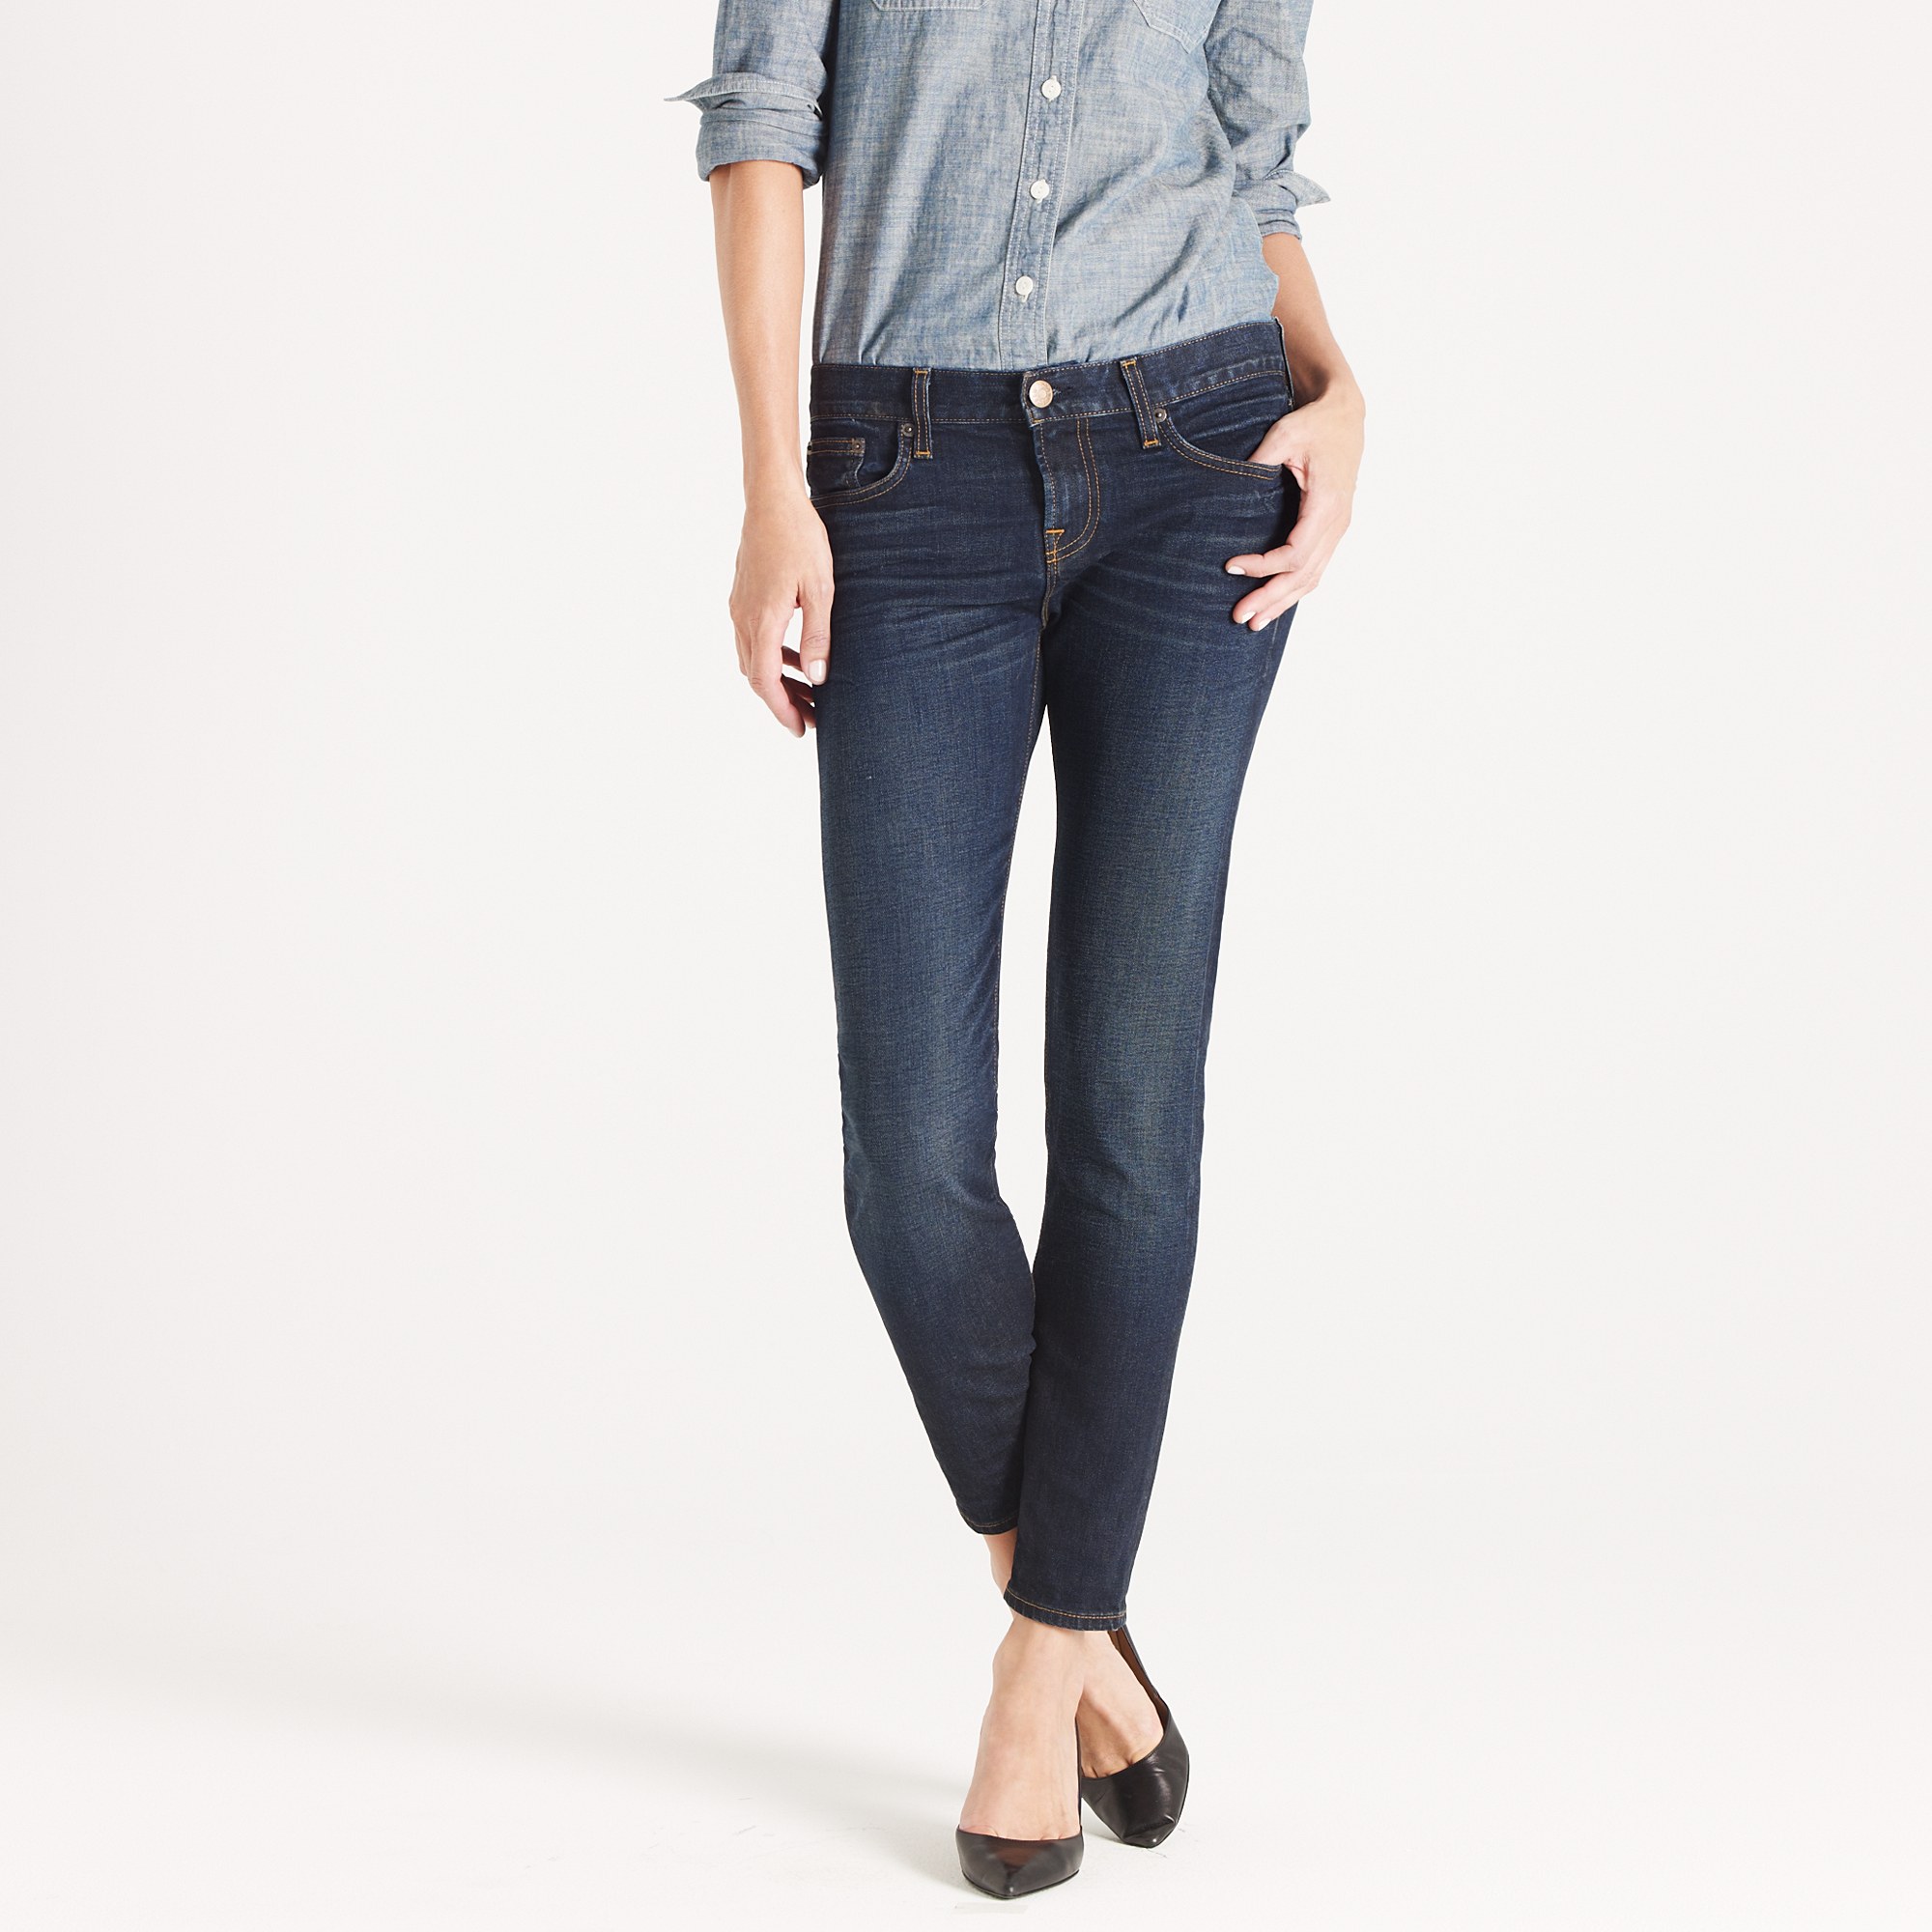 Lyst - J.Crew Ankle Stretch Toothpick Jean in Selvedge Denim in Blue